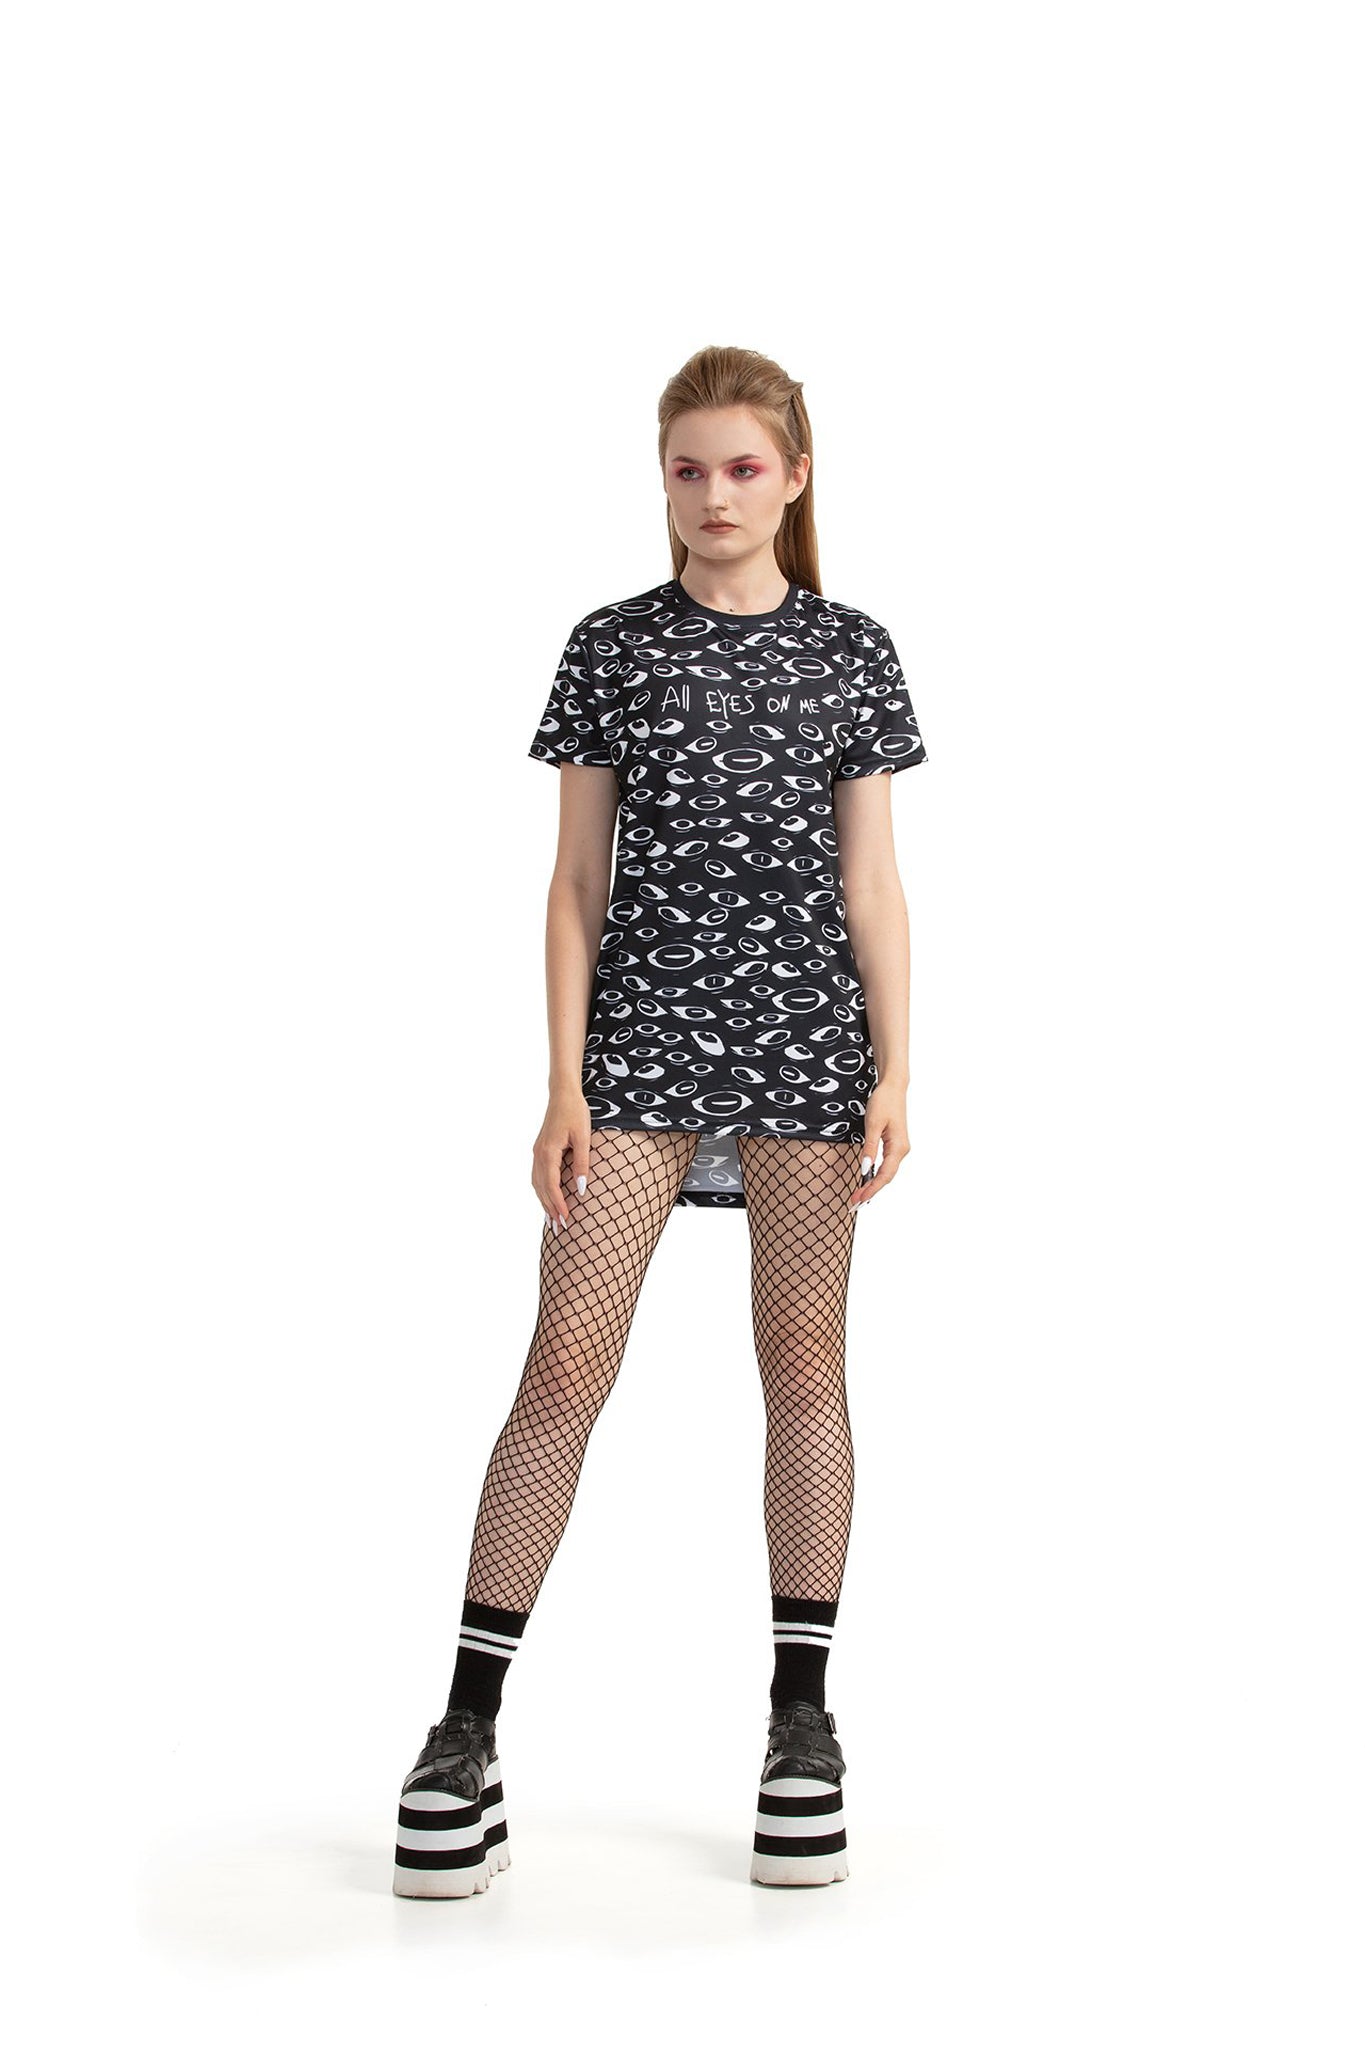 All Eyes On Me - regular fit T-shirt with side cuts